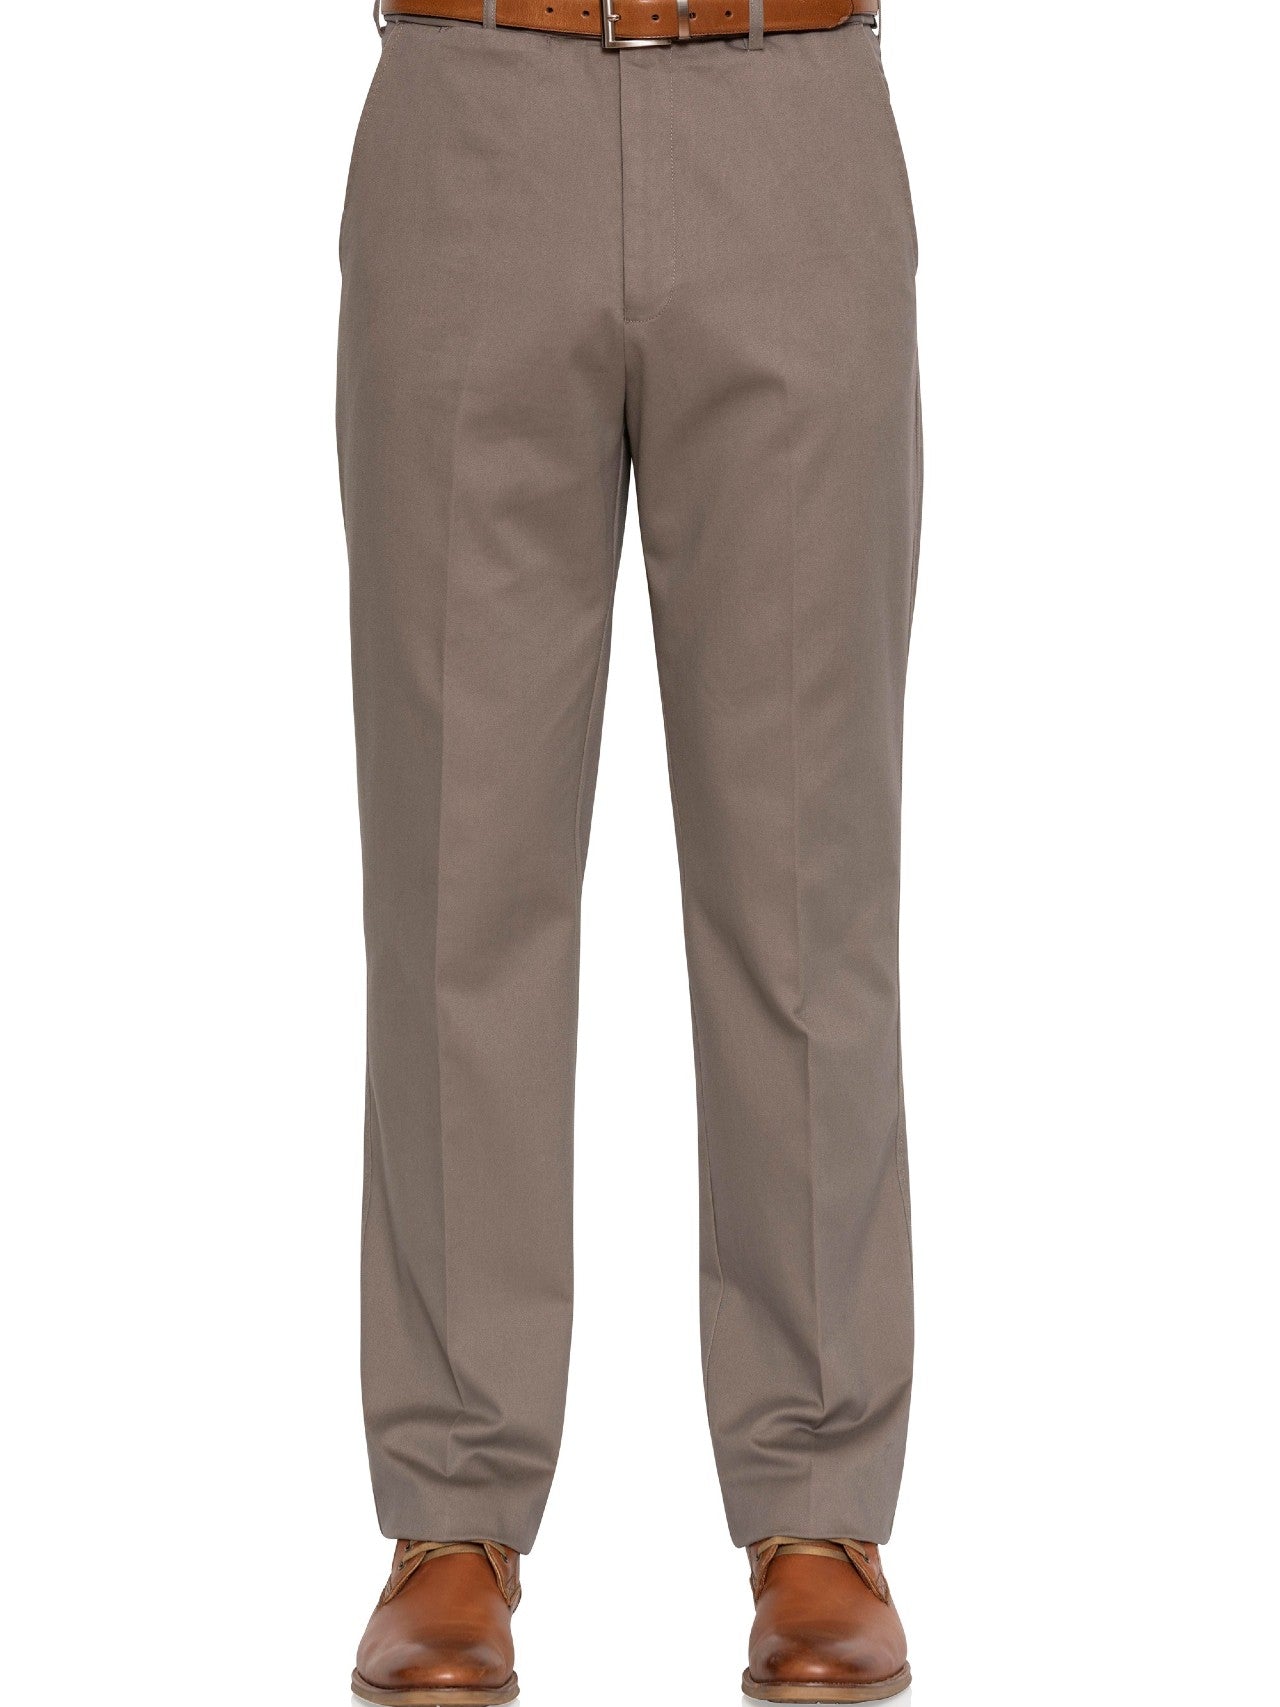 Country Look FYG302 Carnarvon Trousers - Thomson's Suits Ltd - Olive - 87 - 47548